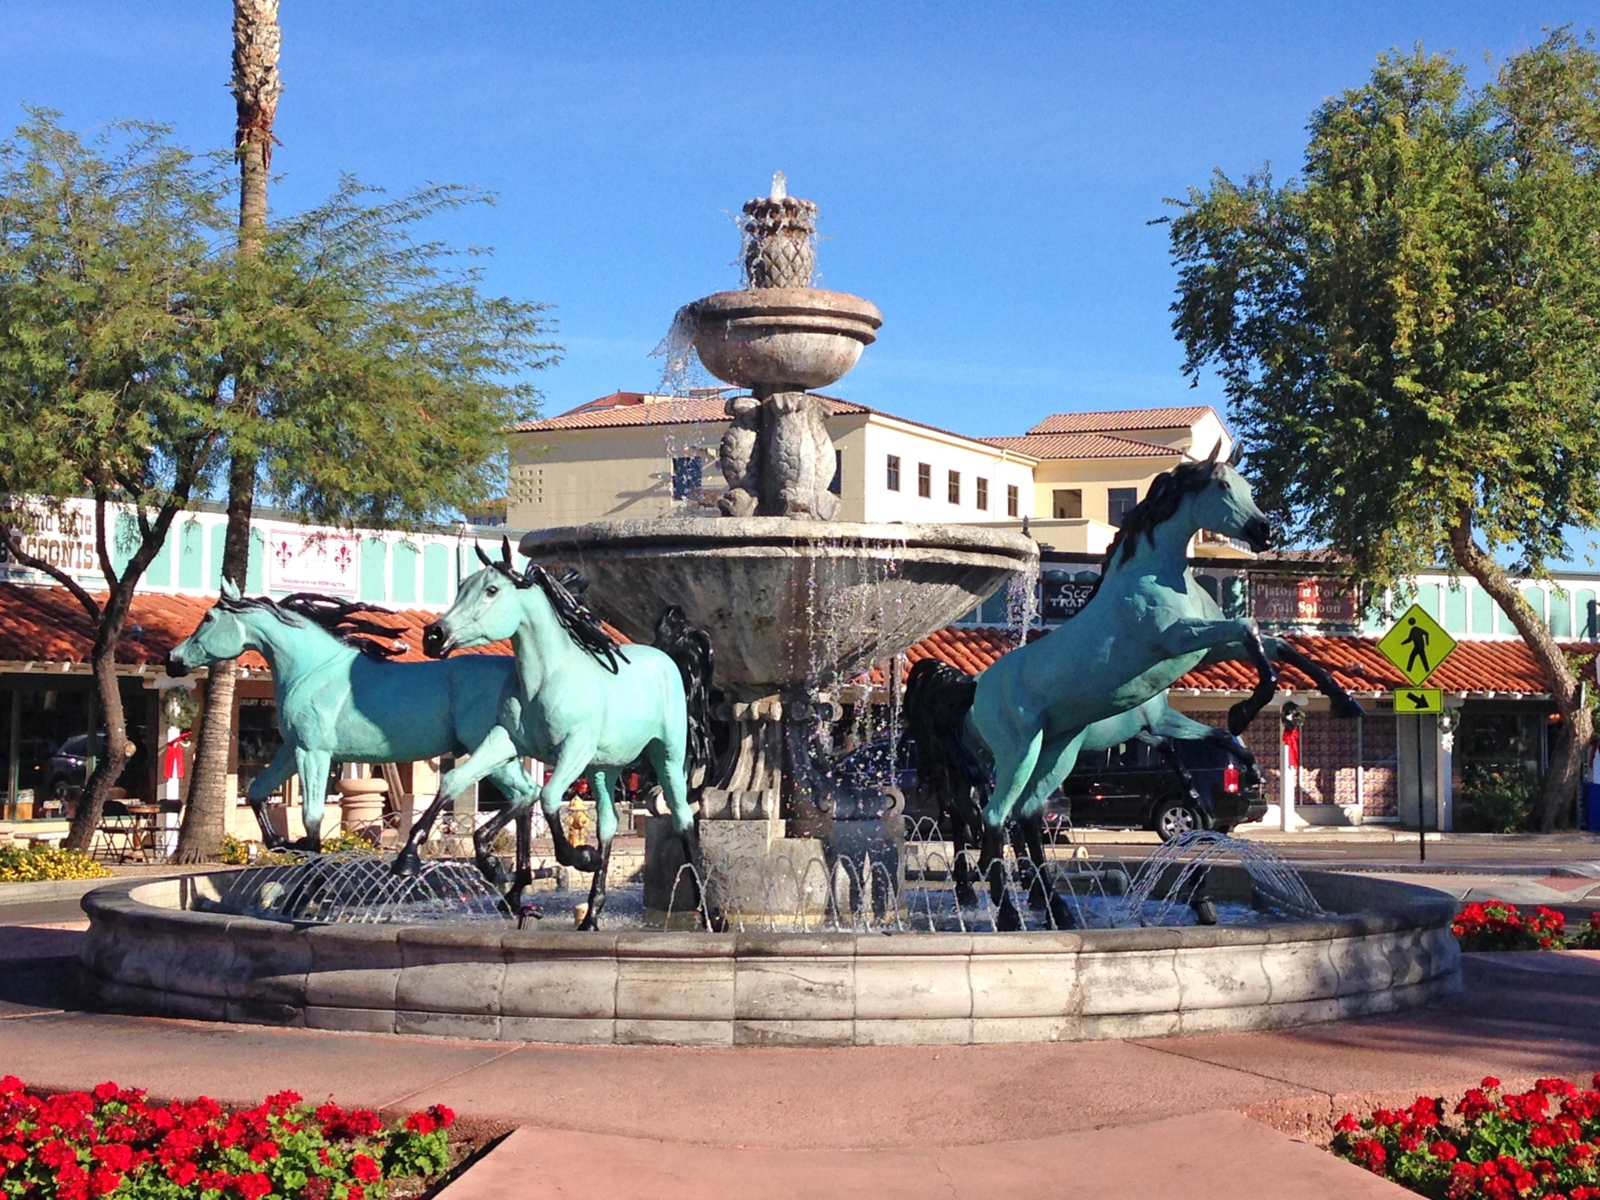 Old Town Scottsdale, one of the best things to do in Scottsdale